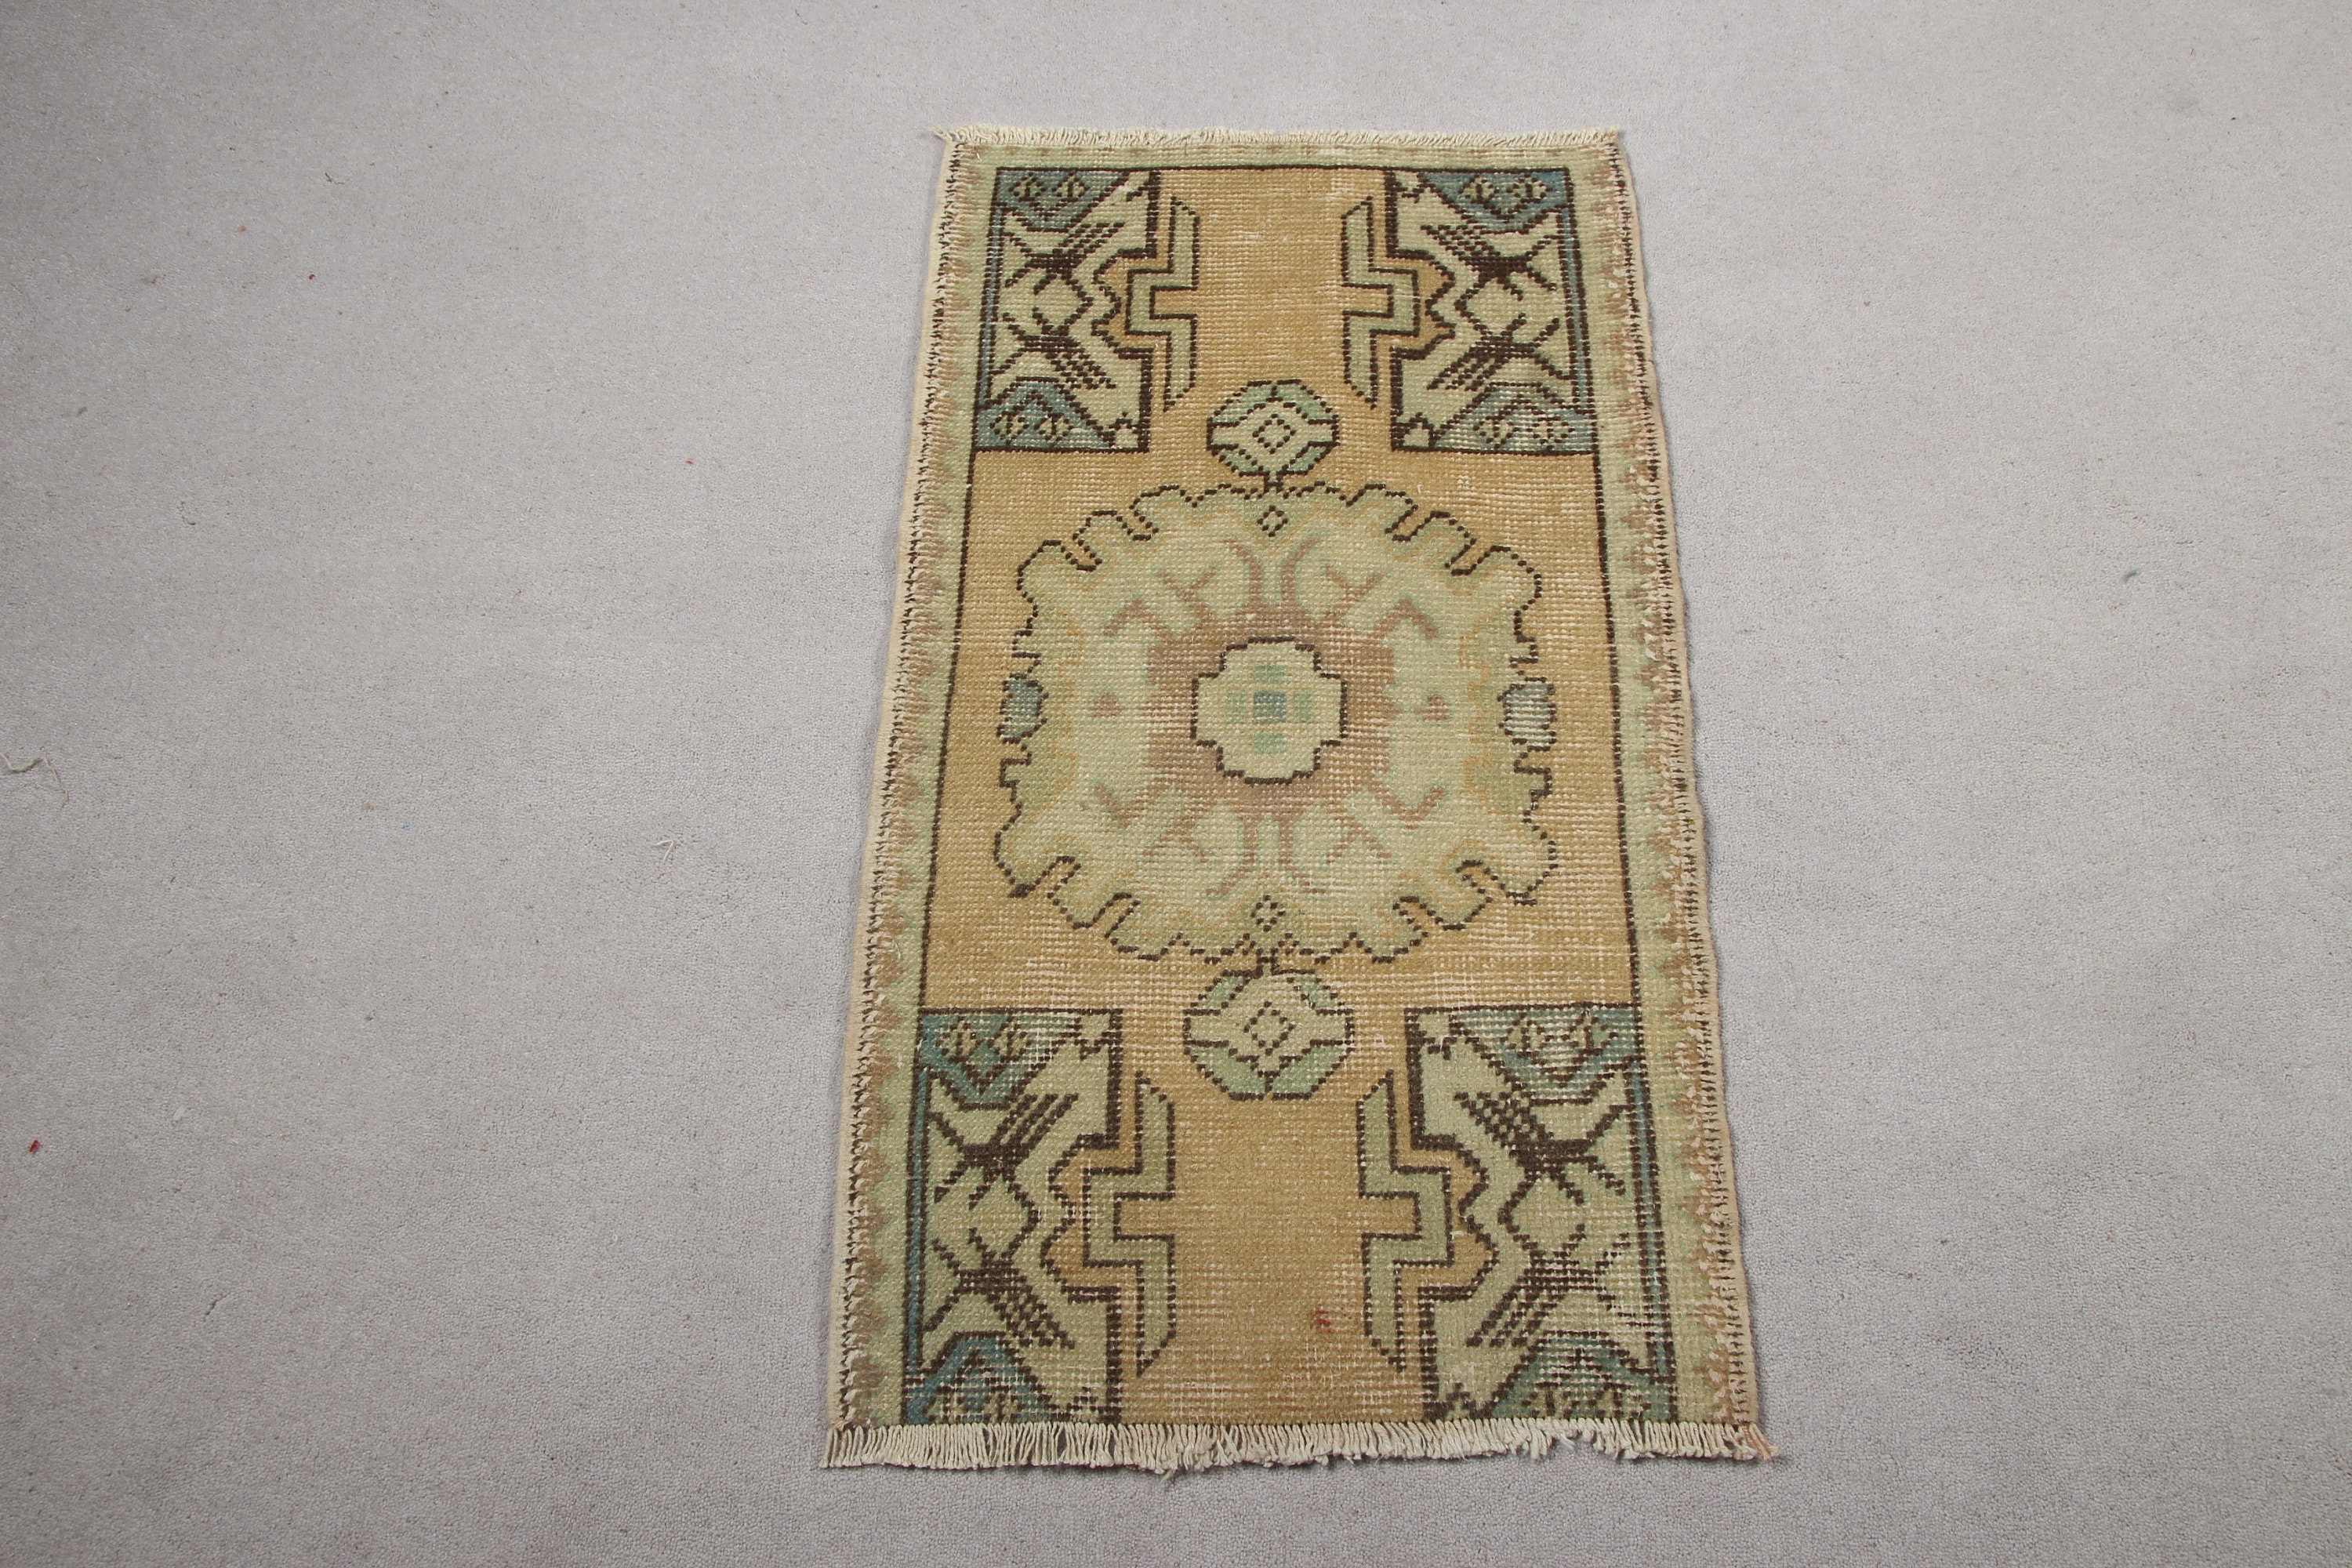 Vintage Rug, Home Decor Rug, Kitchen Rug, Brown Oushak Rugs, Turkish Rugs, Antique Rug, Muted Rug, 1.5x2.8 ft Small Rug, Nursery Rugs